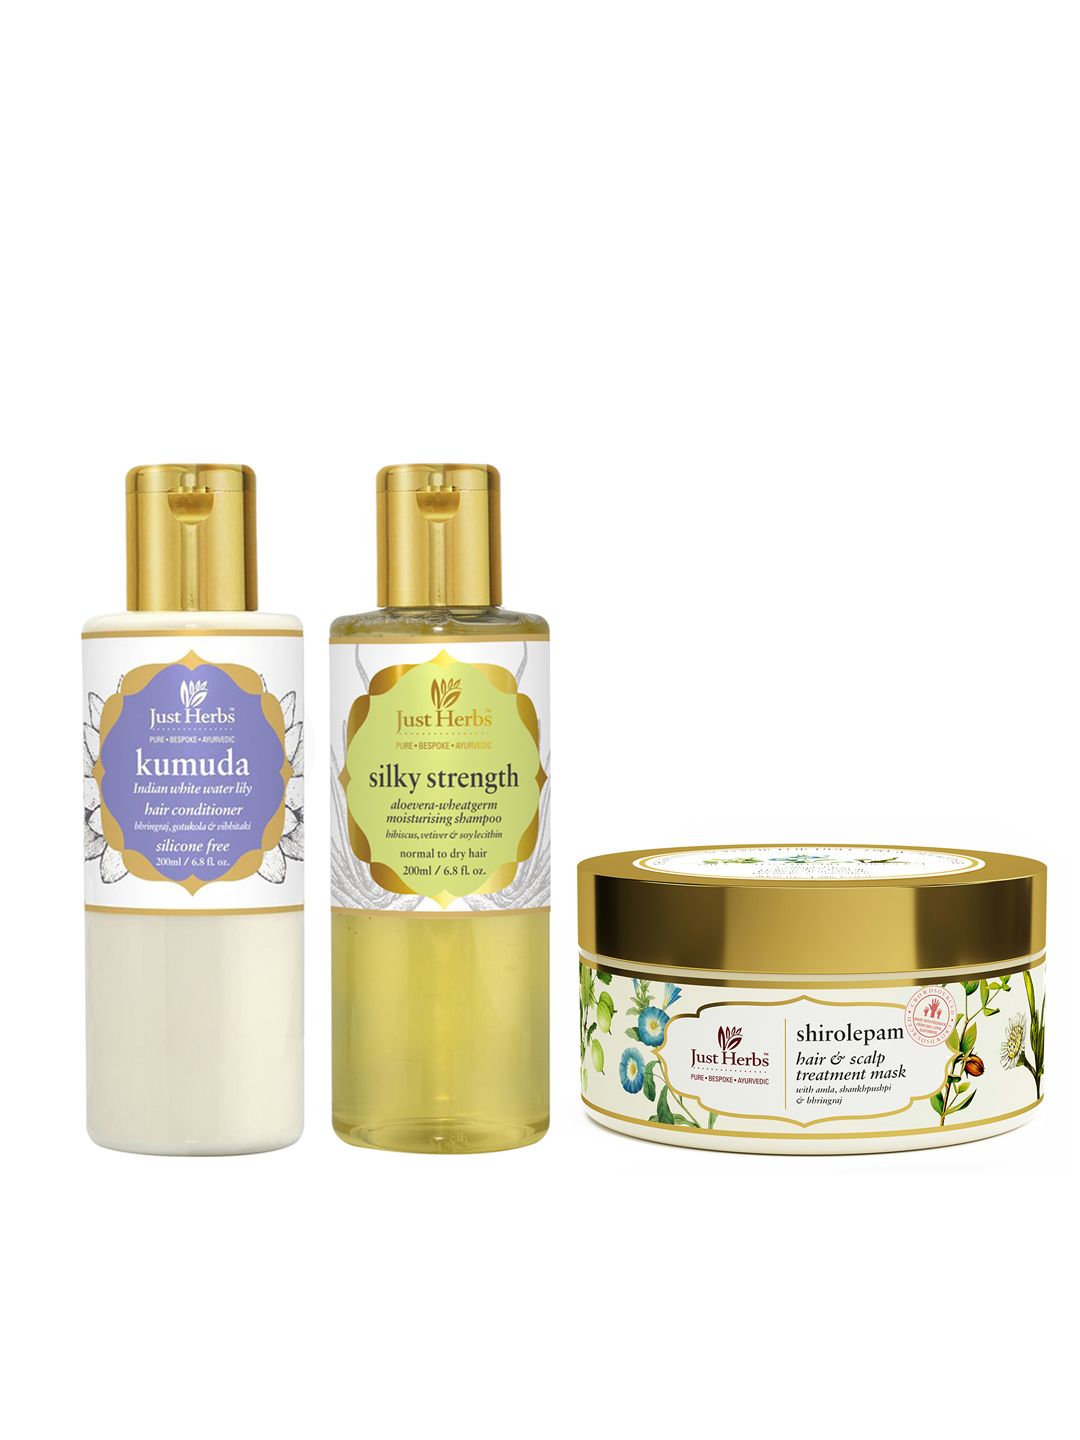 Just Herbs Set of Moisturising Shampoo-Treatment Mask & Waterlily Conditioner Price in India